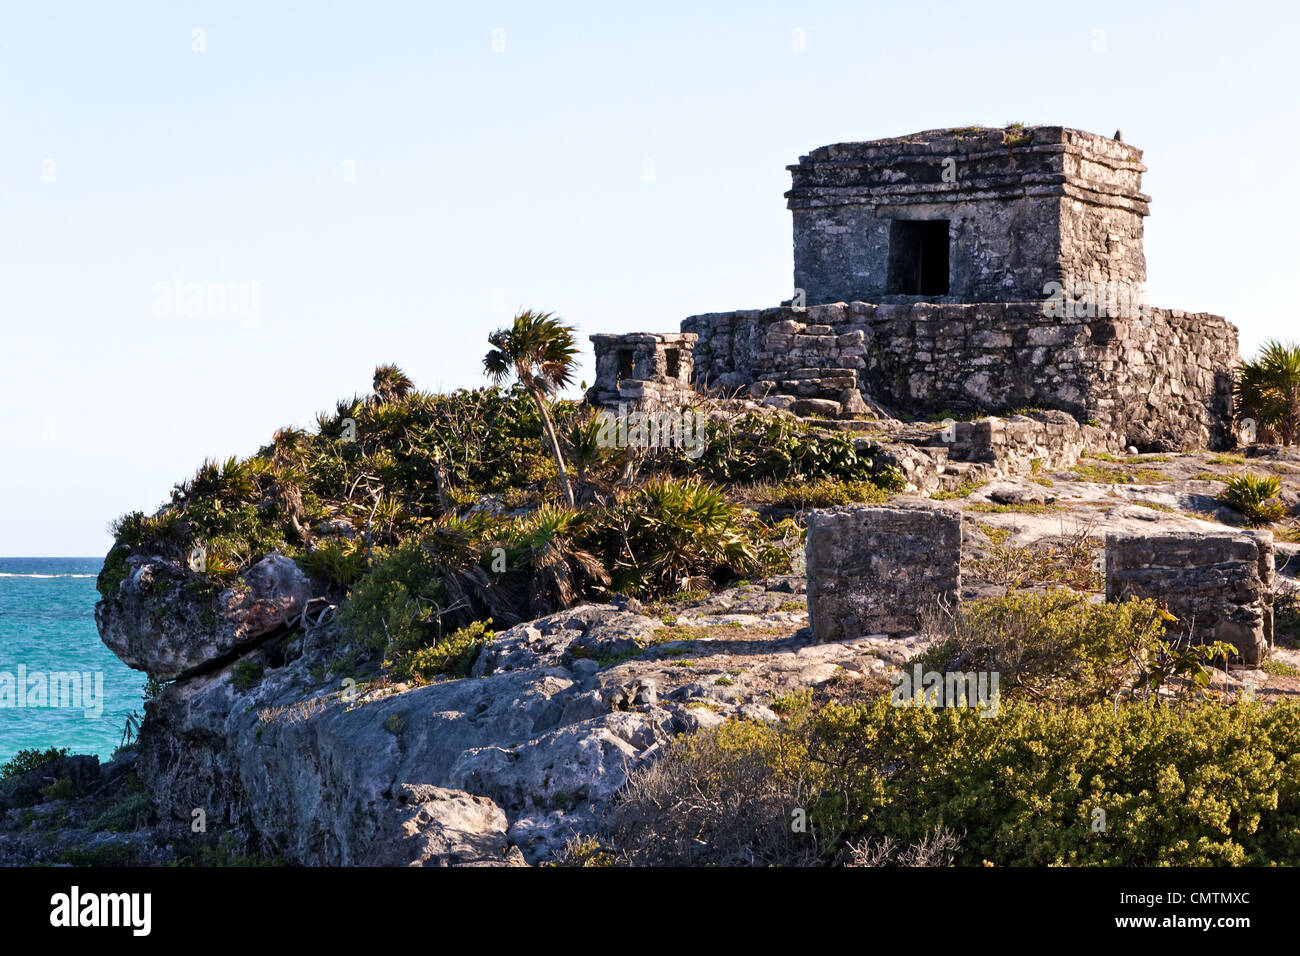 Mayan ruins perched on a cliff above the ocean at Tulum, Quintana Roo, Mexico. Stock Photo